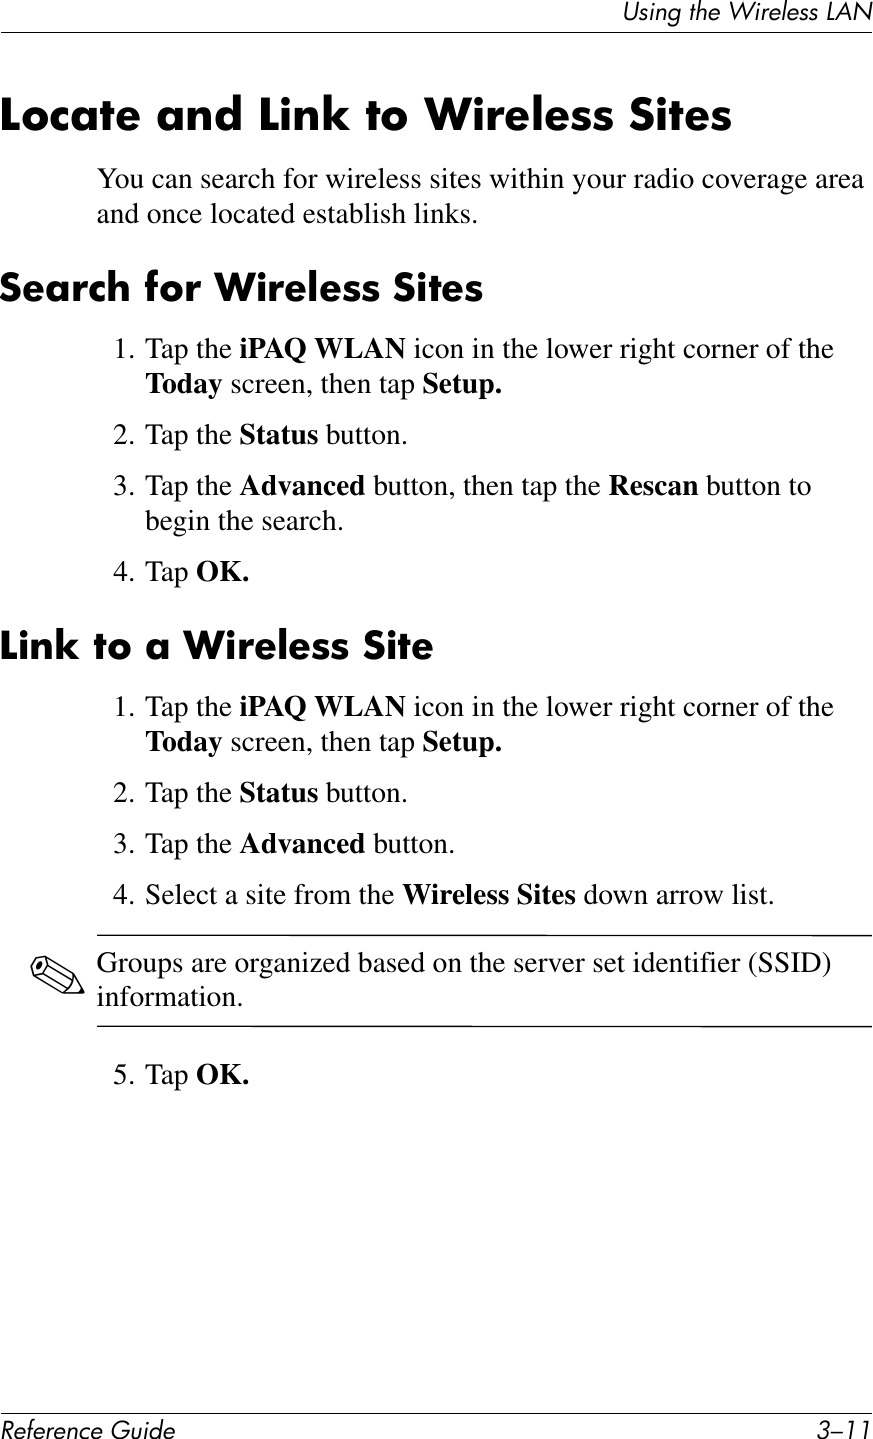 UL*%2&apos;1Q&quot;&apos;J*$&quot;K&quot;LL&apos;M&lt;N!&quot;#&quot;$&quot;%&amp;&quot;&apos;()*+&quot; 9/..A6%;7&quot;&amp;;$*&amp;A)$T&amp;76&amp;+)!&quot;@&quot;88&amp;:)7&quot;8You can search for wireless sites within your radio coverage area and once located establish links.:&quot;;!%?&amp;#6!&amp;+)!&quot;@&quot;88&amp;:)7&quot;81. Tap the iPAQ WLAN icon in the lower right corner of the Today screen, then tap Setup.2. Tap the Status button.3. Tap the Advanced button, then tap the Rescan button to begin the search.4. Tap OK.A)$T&amp;76&amp;;&amp;+)!&quot;@&quot;88&amp;:)7&quot;1. Tap the iPAQ WLAN icon in the lower right corner of the Today screen, then tap Setup.2. Tap the Status button.3. Tap the Advanced button.4. Select a site from the Wireless Sites down arrow list.✎Groups are organized based on the server set identifier (SSID) information.5. Tap OK.